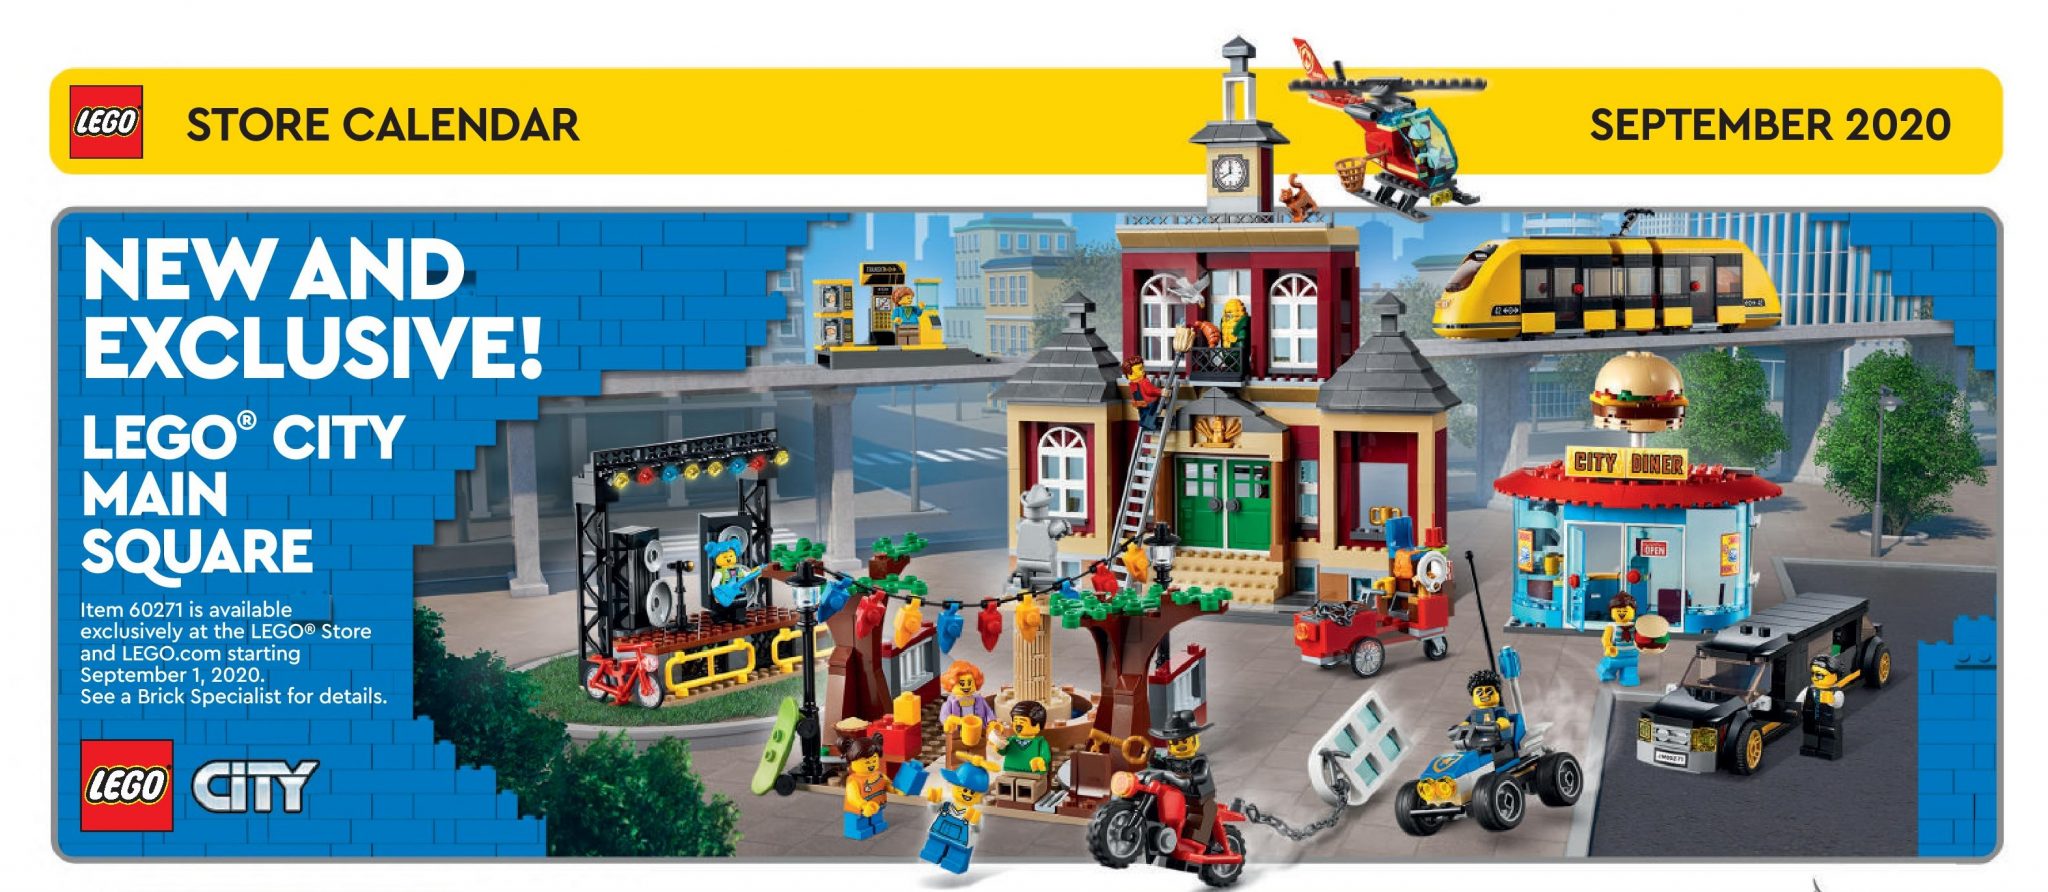 LEGO September 2020 Store Calendar Promotions & Events The Brick Fan